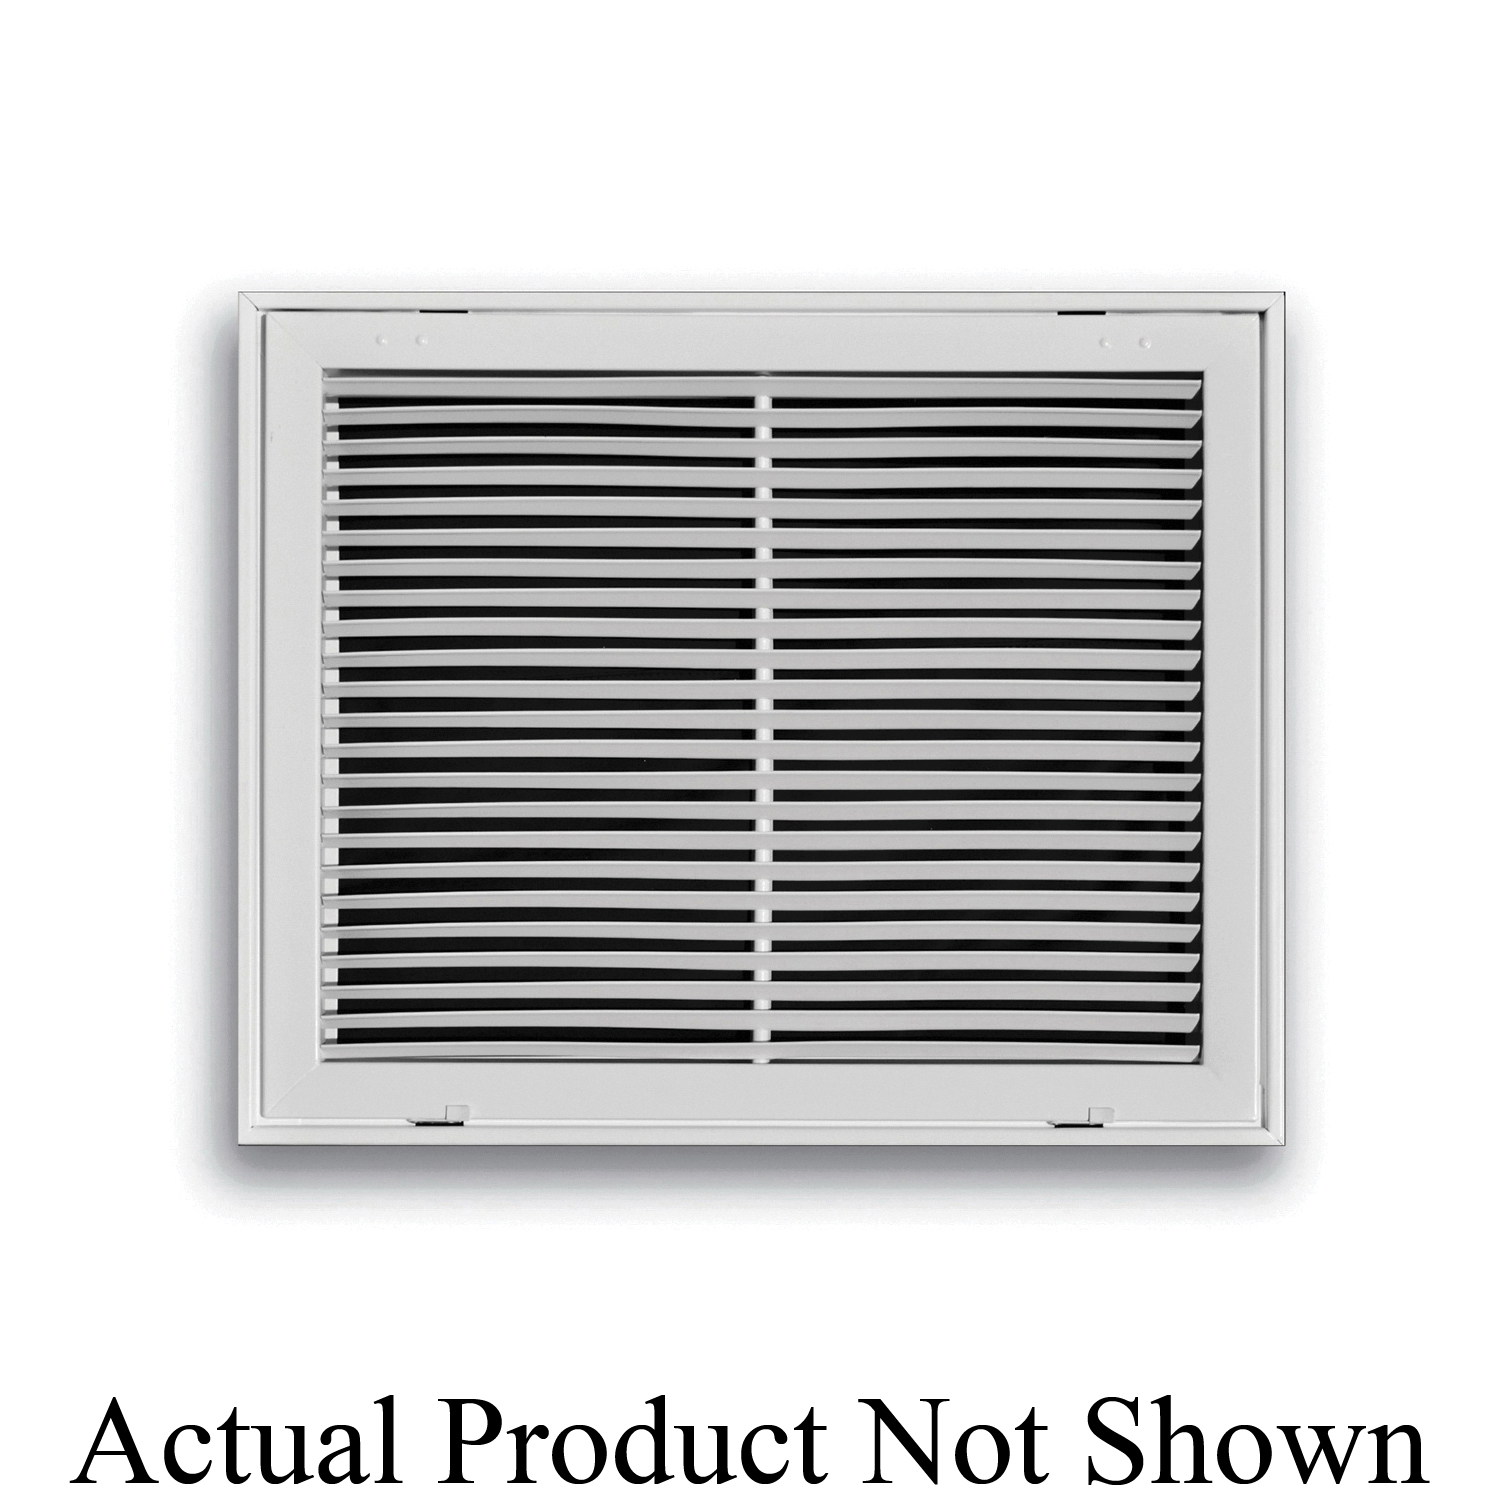 TRUaire™ 290 30X12 1-Way Return Air Filter Grille, 30 x 12 in, 2041 cfm, Steel, Pristine White Powder Coated, Import